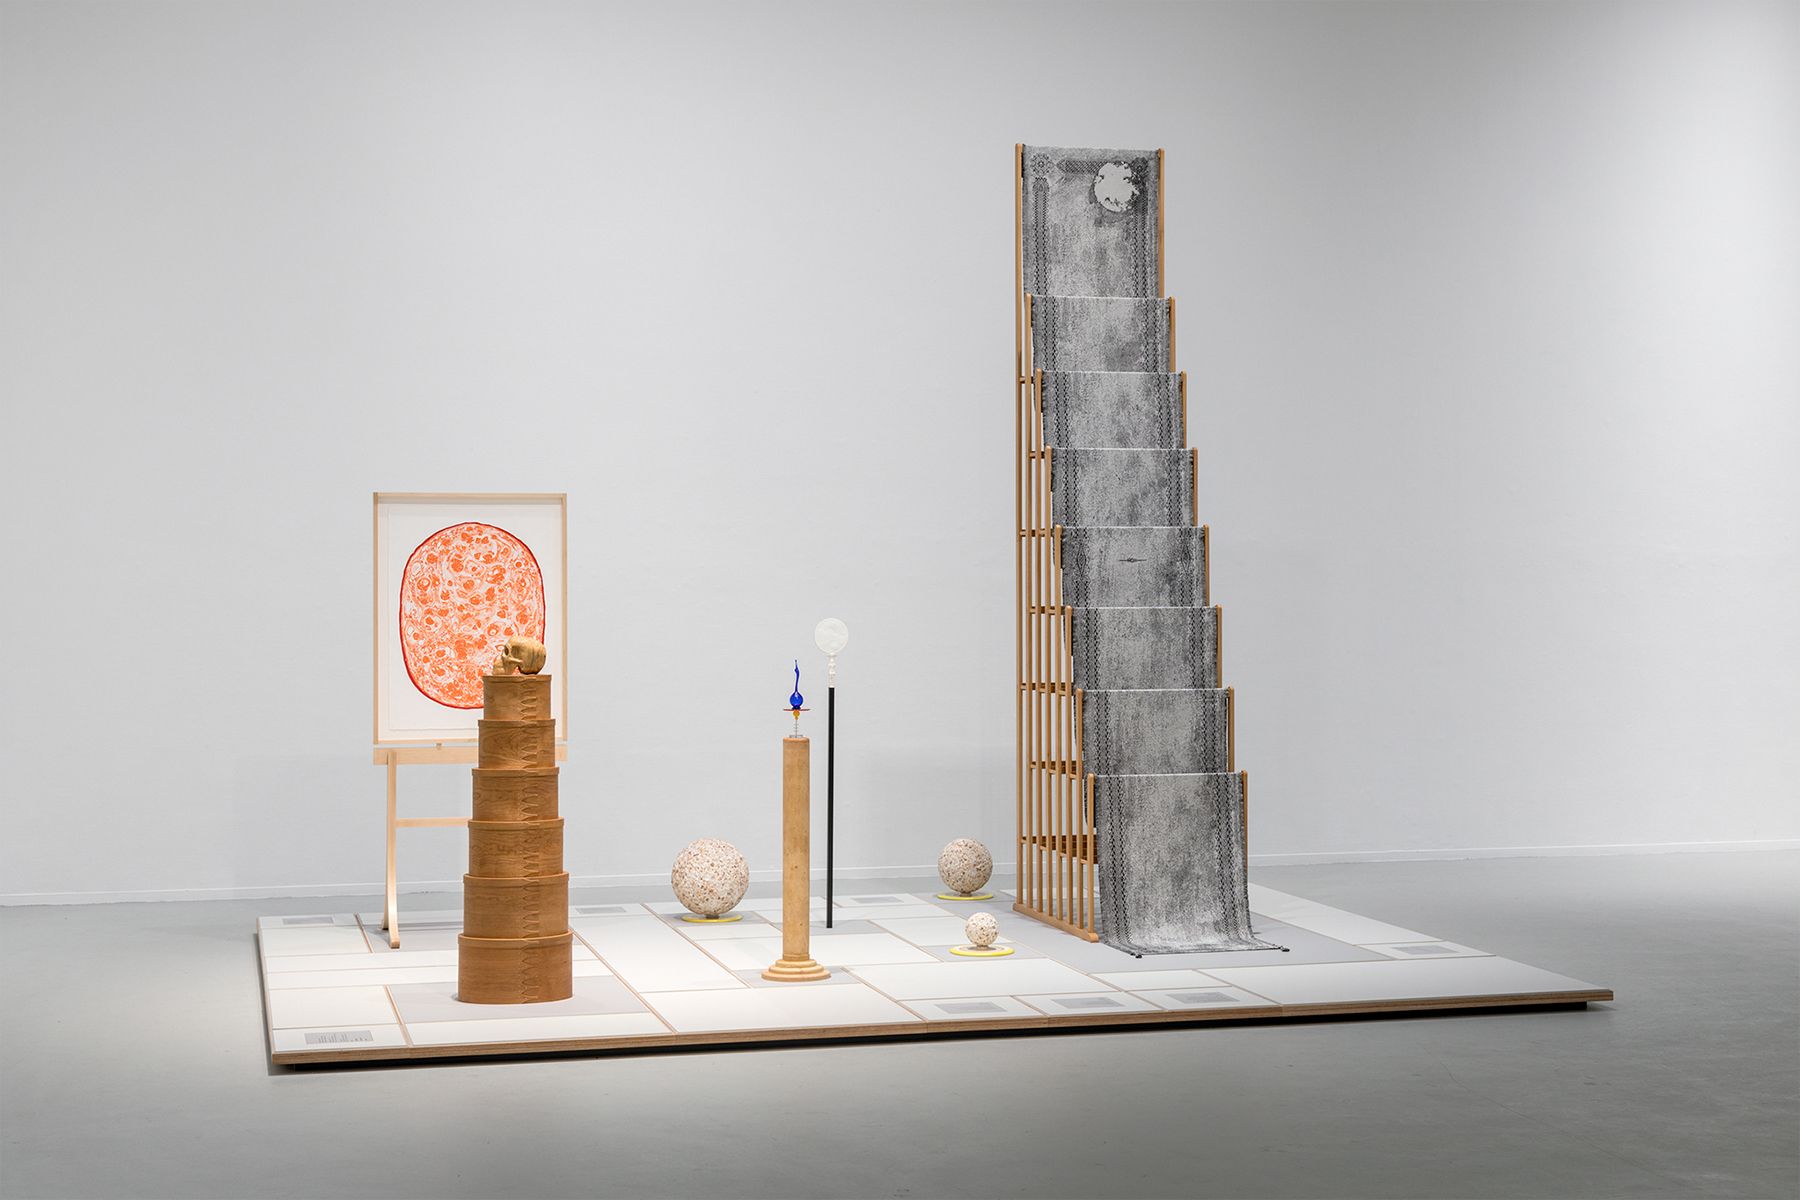   Maayan Elyakim, Graduate and lecturer. Installation view from the exhibition Sun, Dial at the Tel Aviv Museum of Art, 2022. Photo: Elad Sarig  